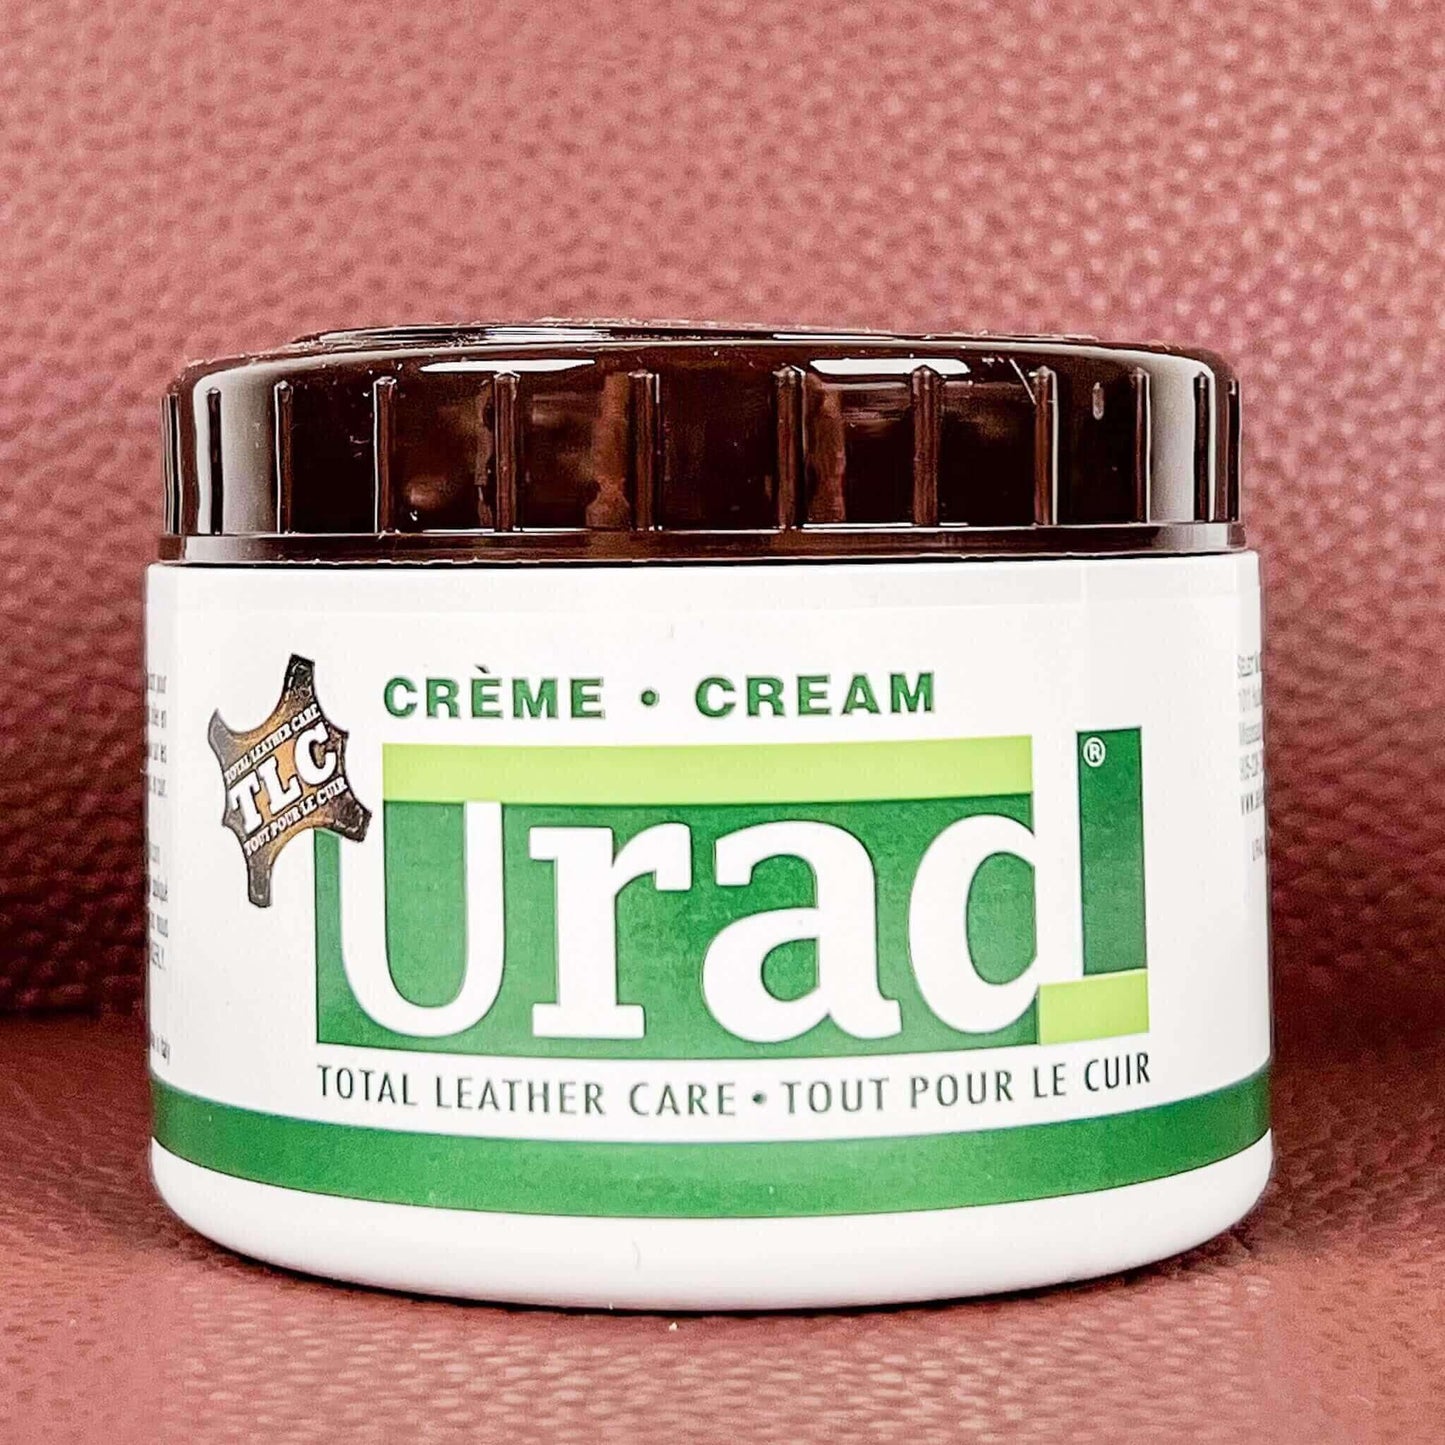 Urad's natural leather polish properties make it an ideal choice for top grain leather conditioner, helping to maintain its natural sheen and suppleness.